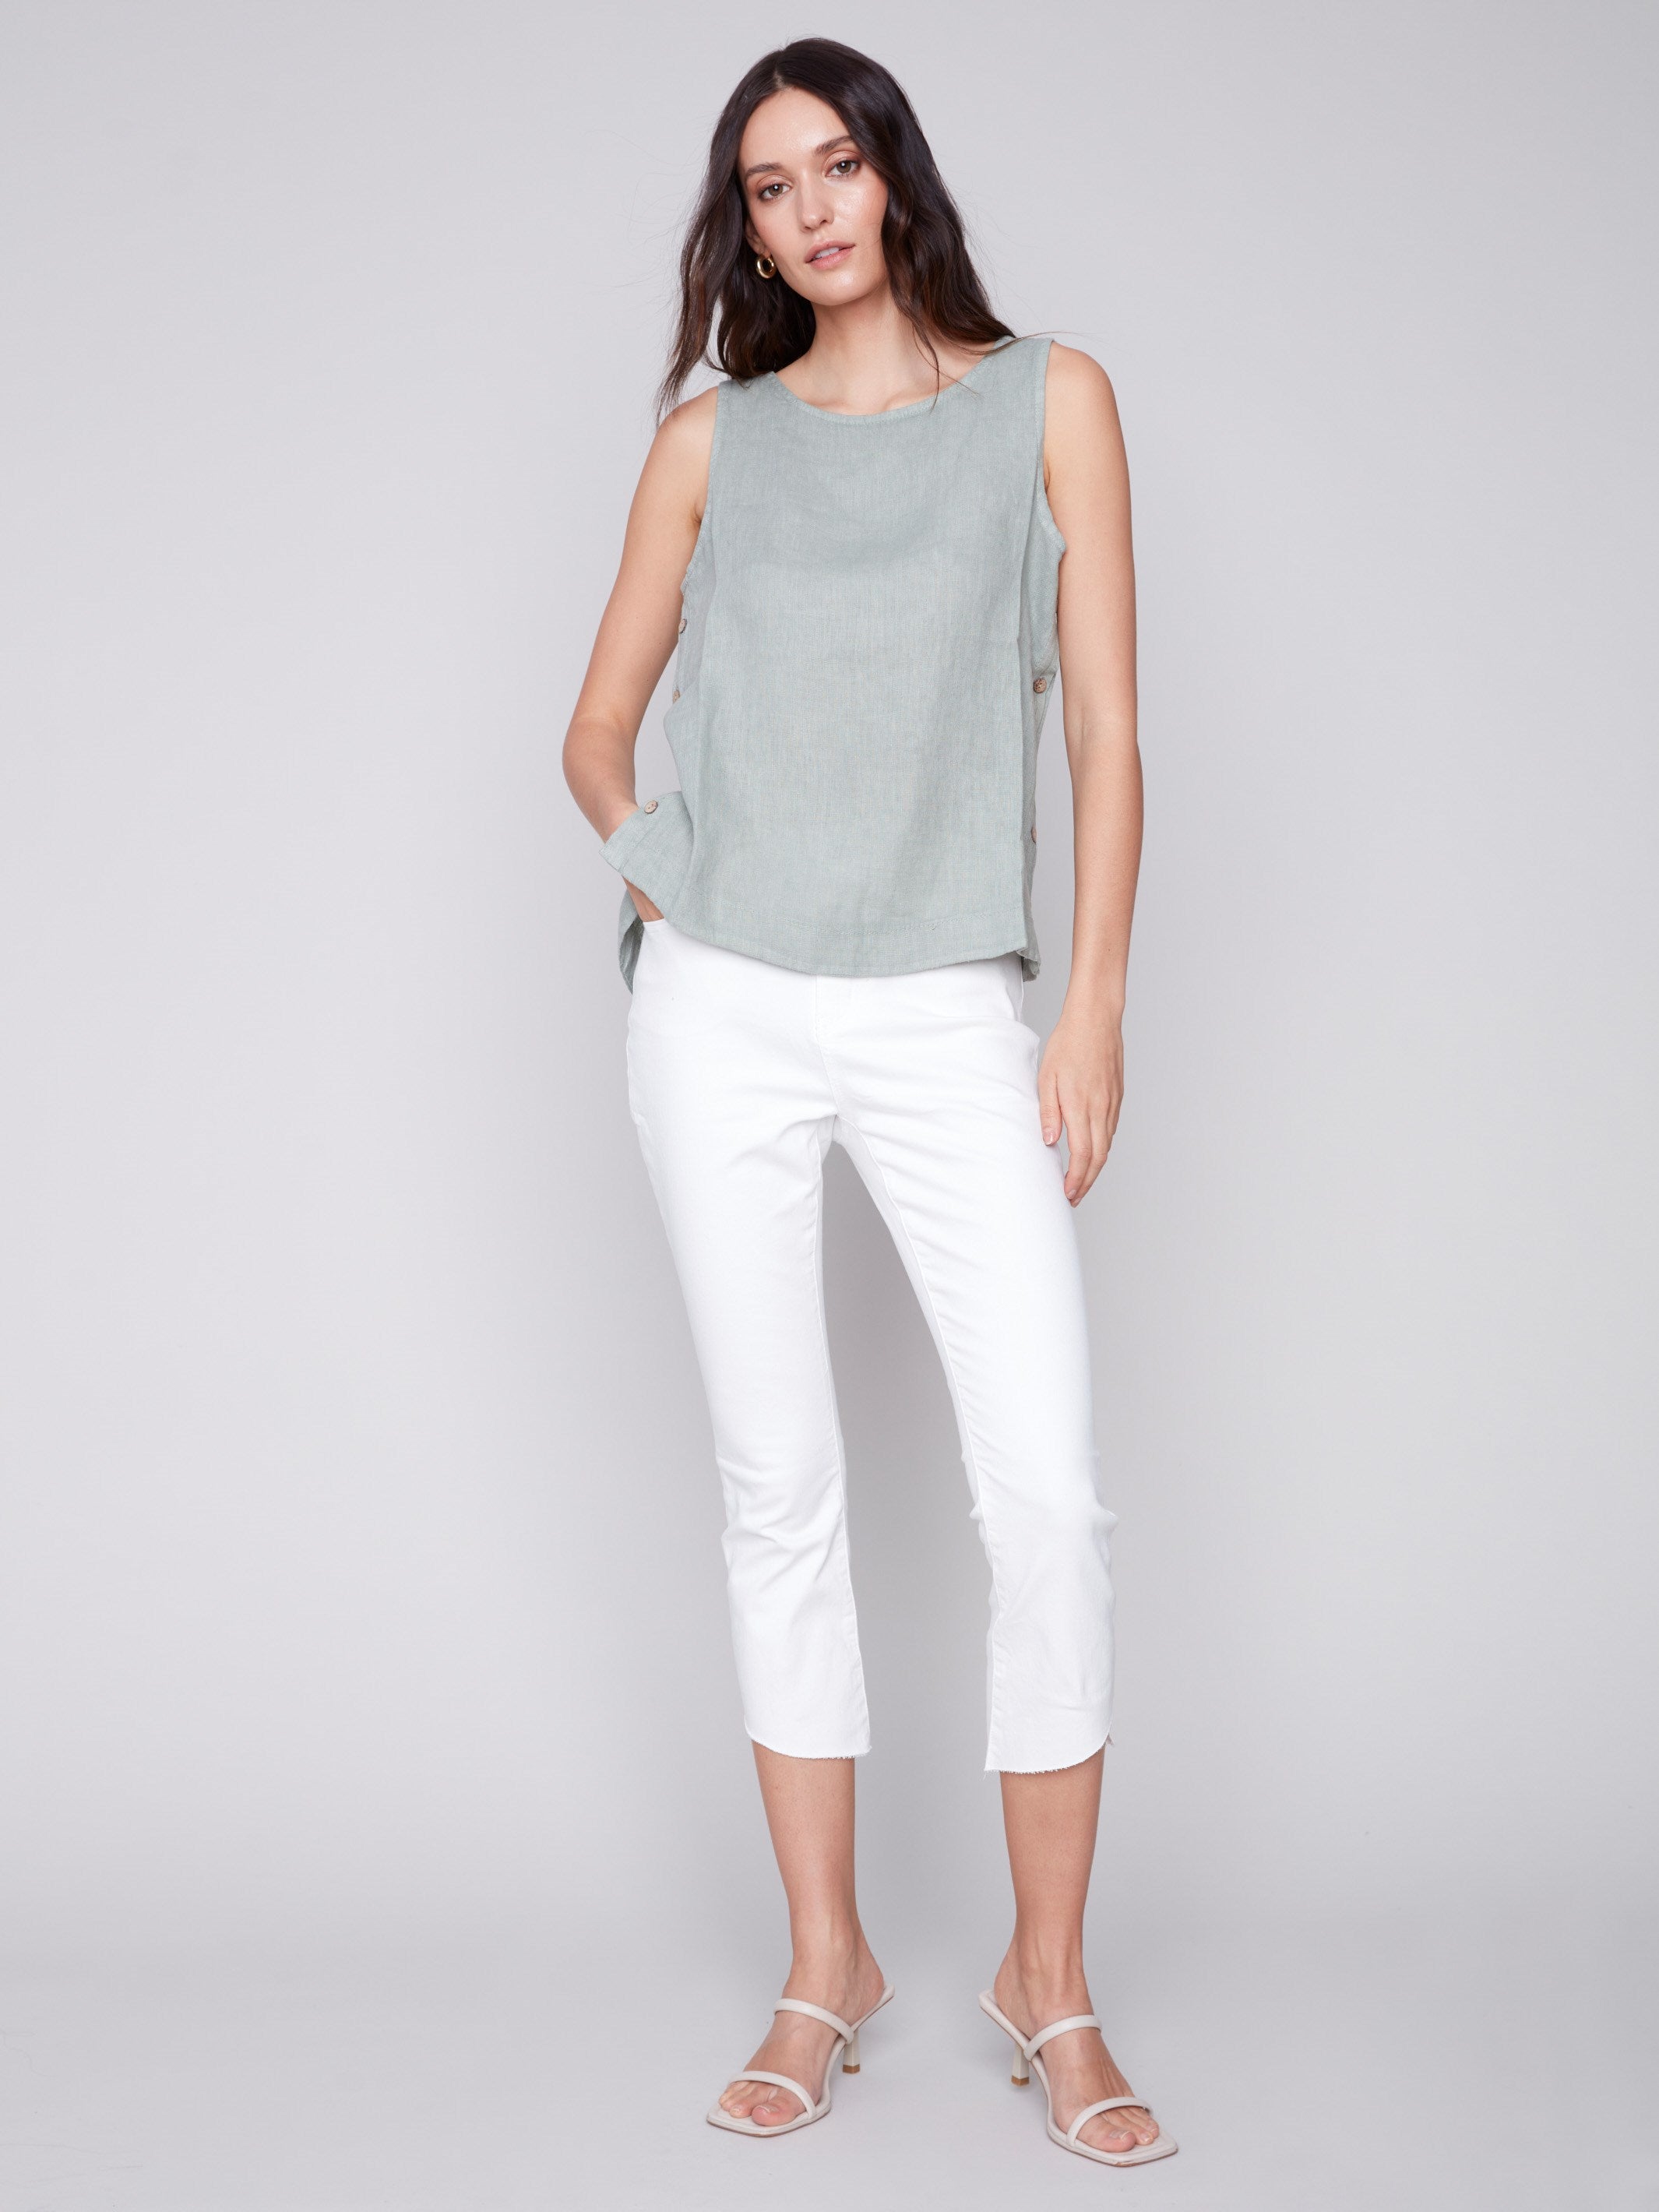 Sleeveless Linen Top with Side Buttons - Celadon - Charlie B Collection Canada - Image 3